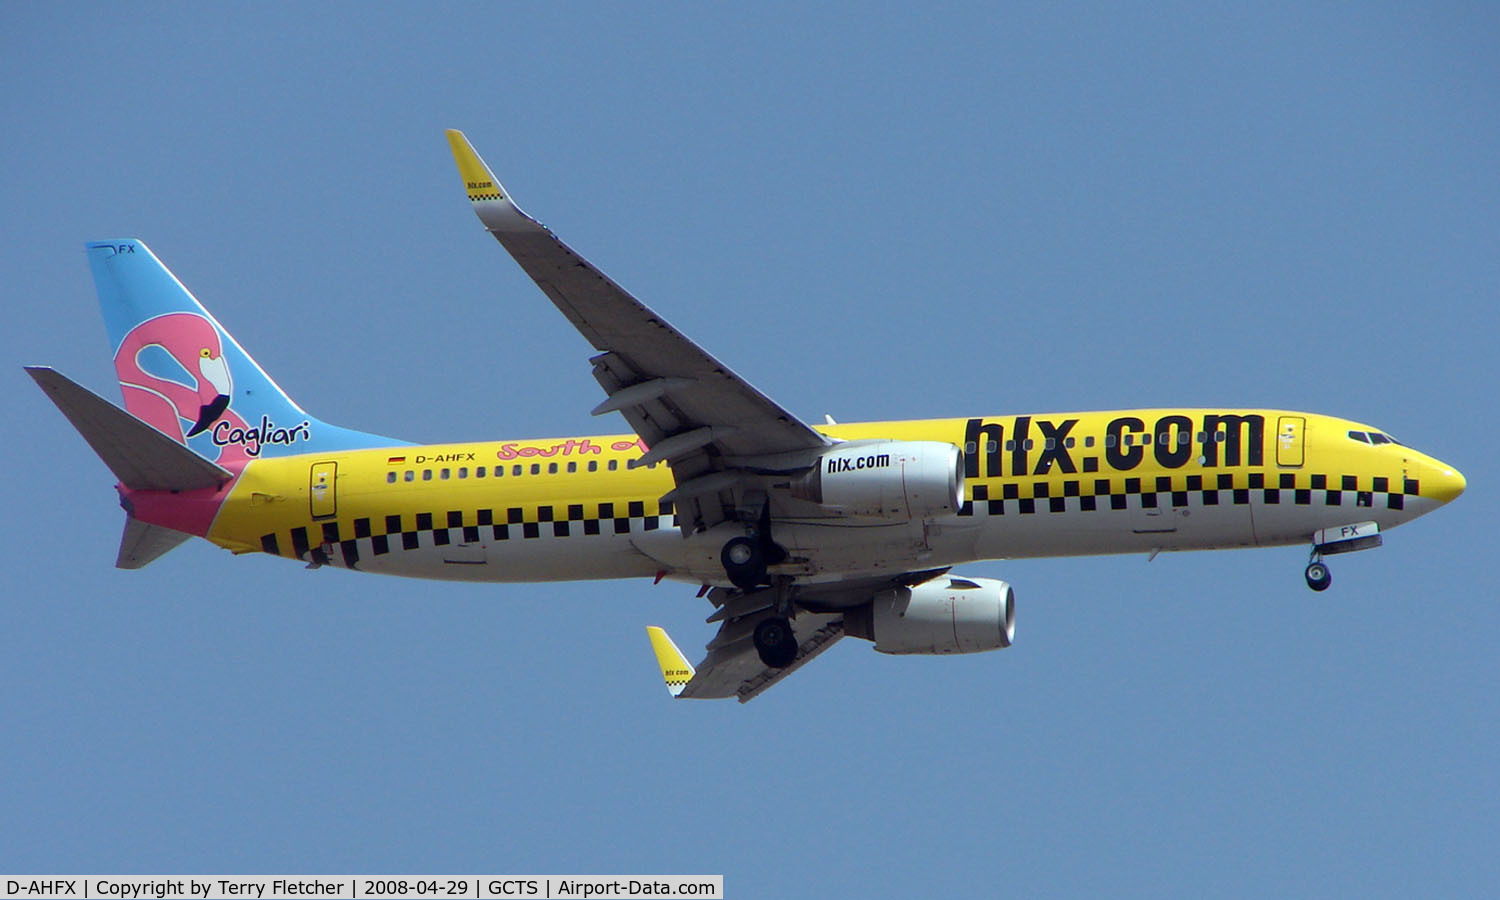 D-AHFX, 2001 Boeing 737-8K5 C/N 30416, Colouful Hapag Lloyd Express on approach to TFS